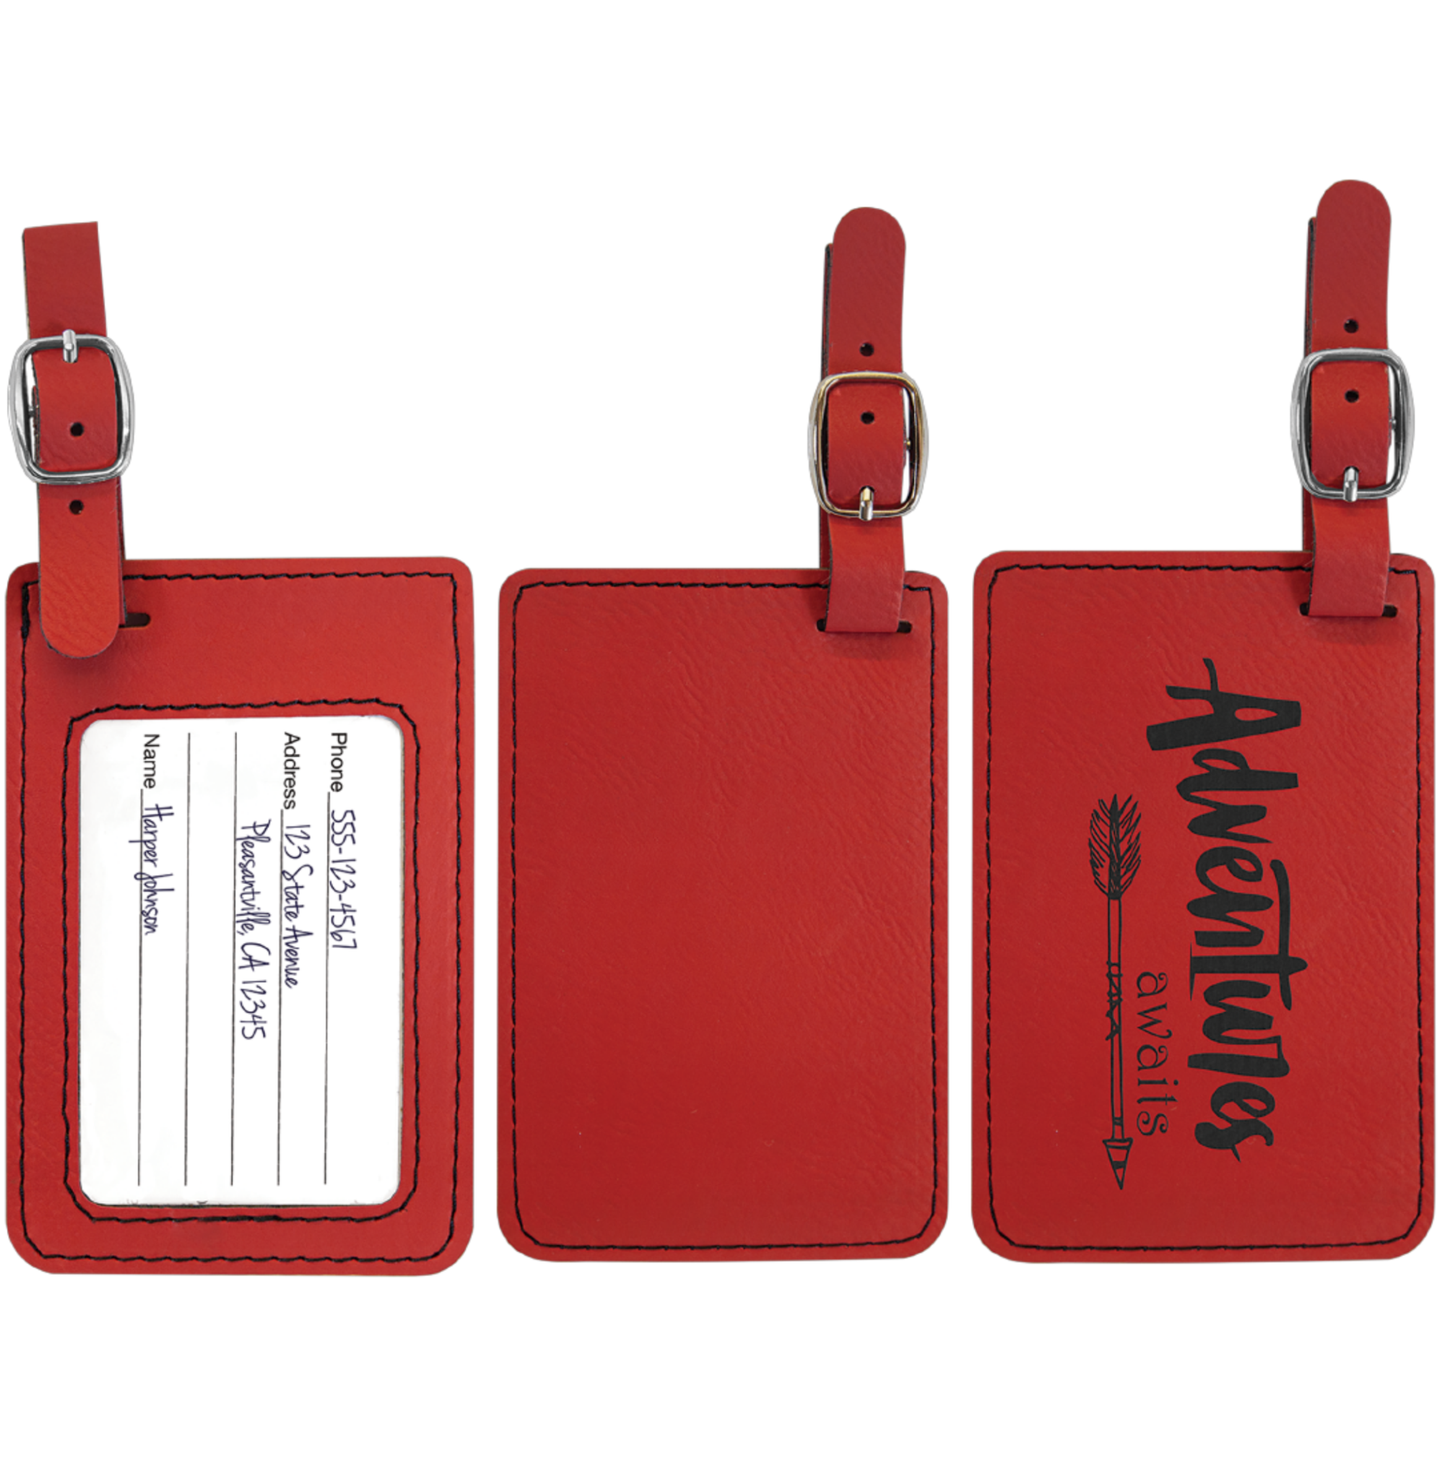 Personalized Luggage Tag